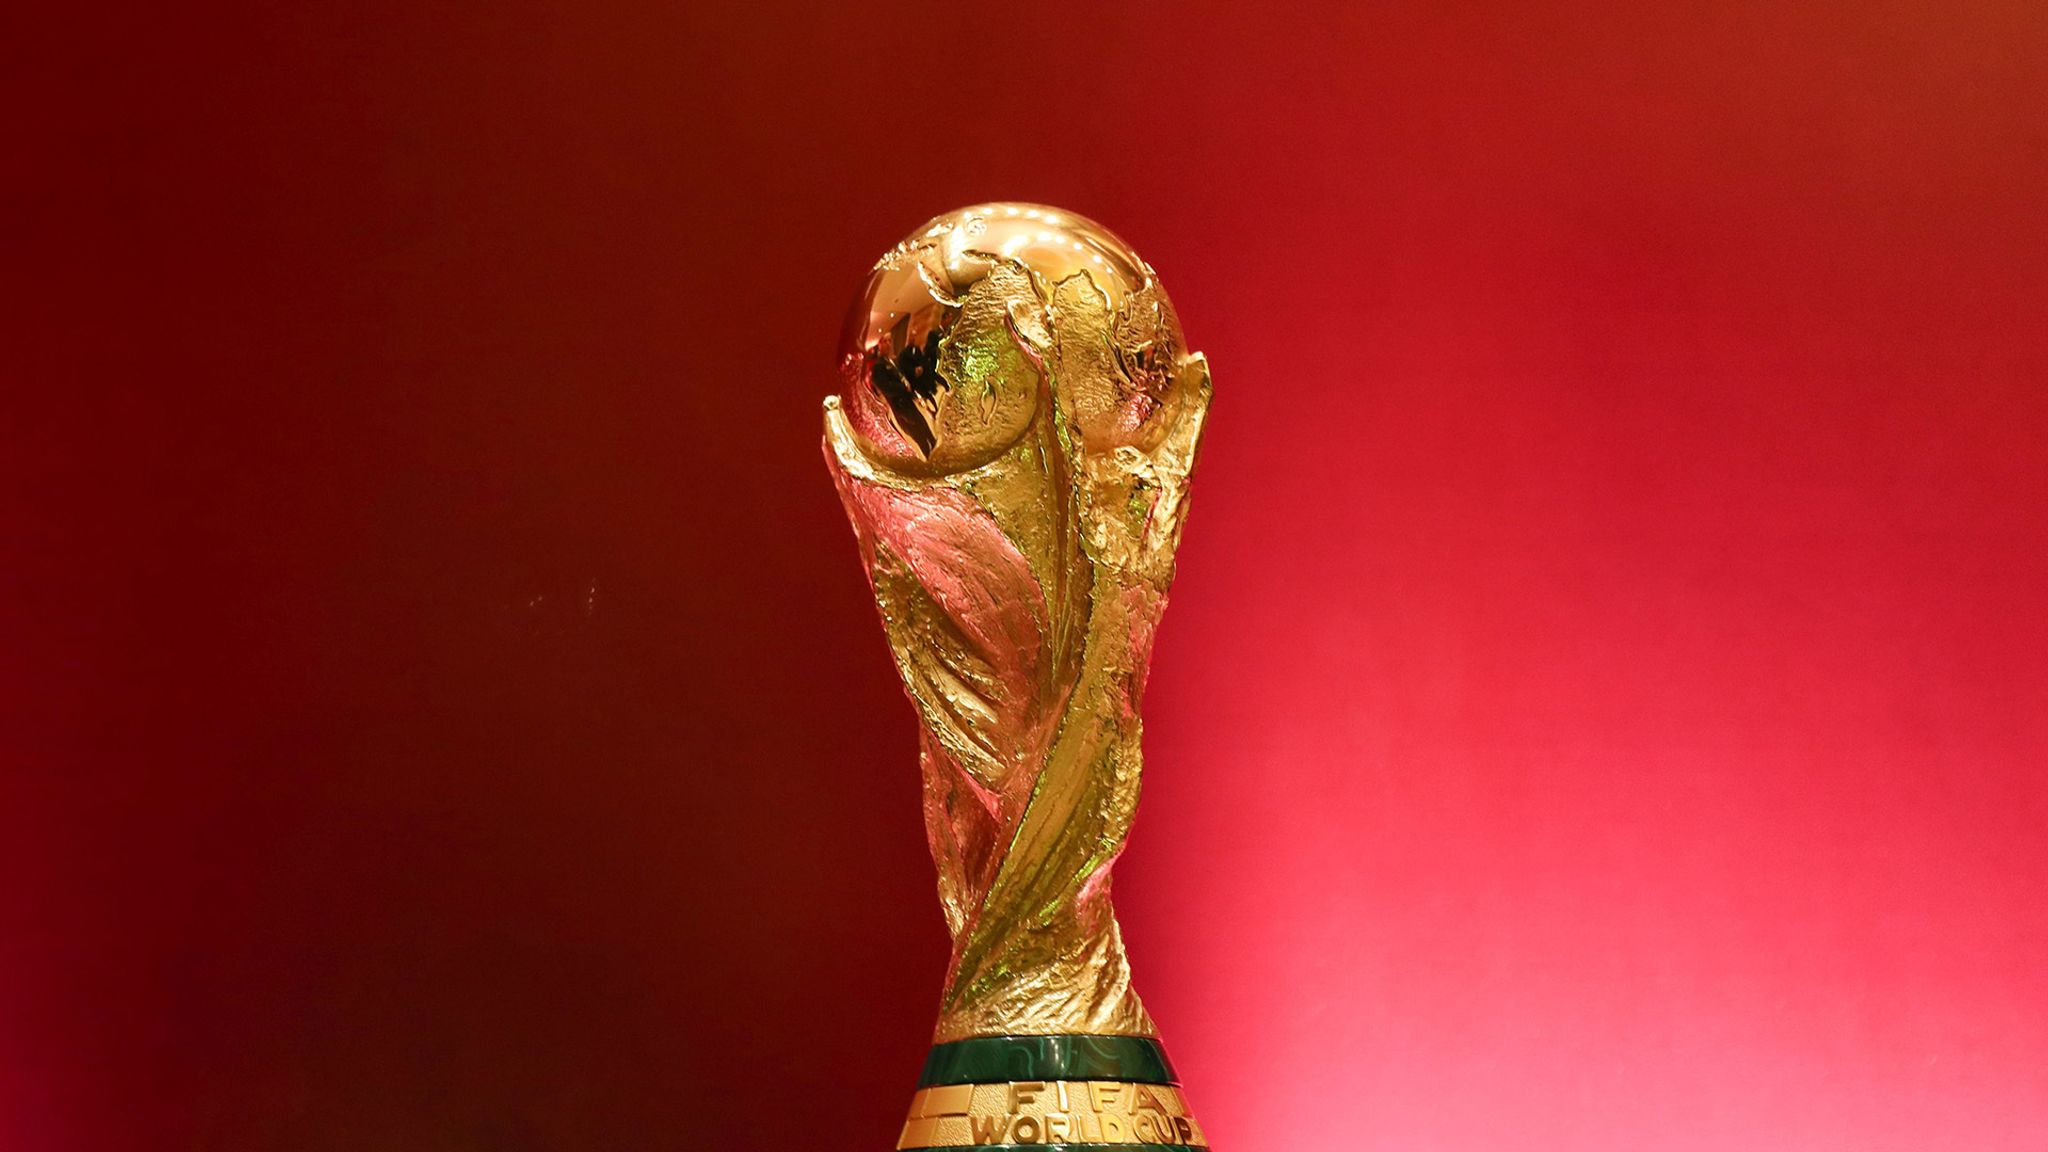 Qatar 2022 World Cup schedule revealed by FIFA, Football News